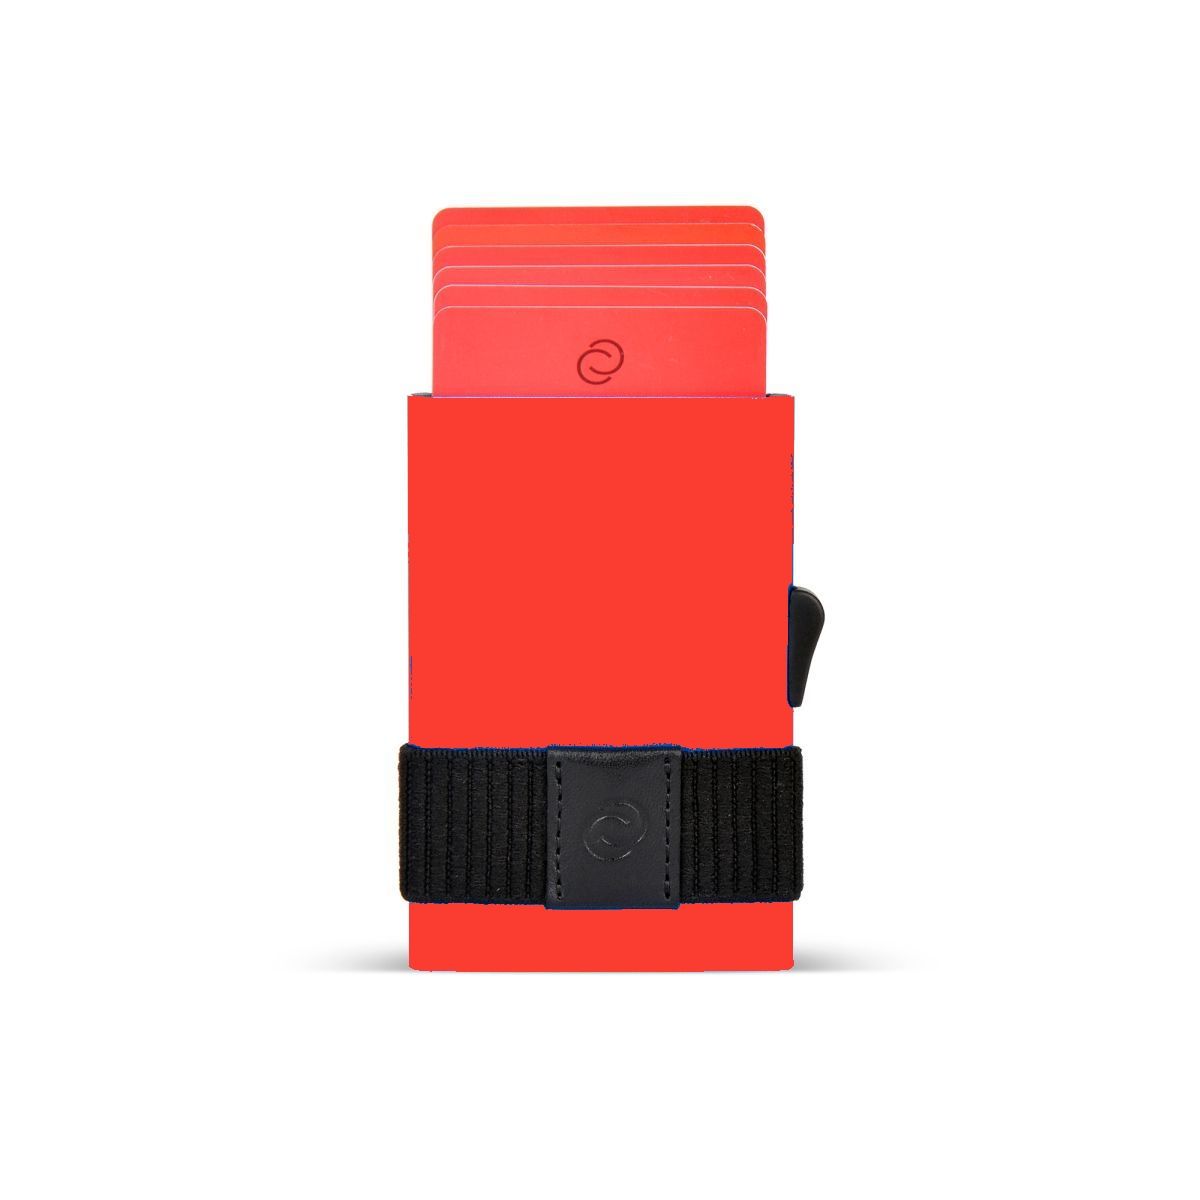 C-Secure Slim Aluminum Card Holder with Money Band - Red